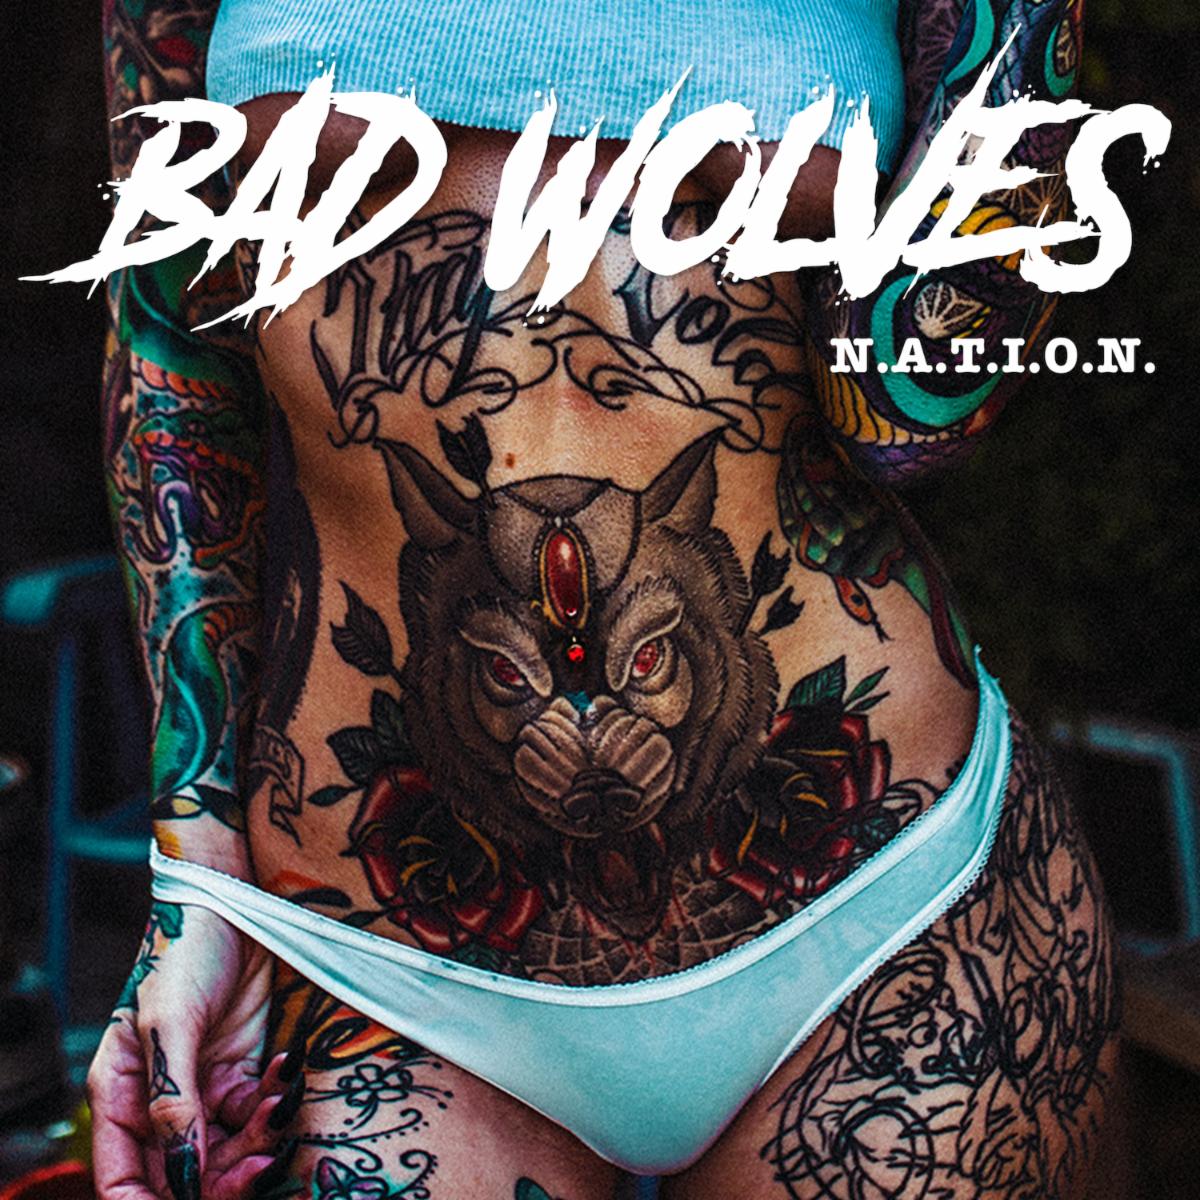 Bad Wolves Announce Their Highly Anticipated Sophomore Album 'N.A.T.I.O.N.,' Out October 25th On Eleven Seven Music; Pre-Order + New Track “Killing Me Slowly” Available Today